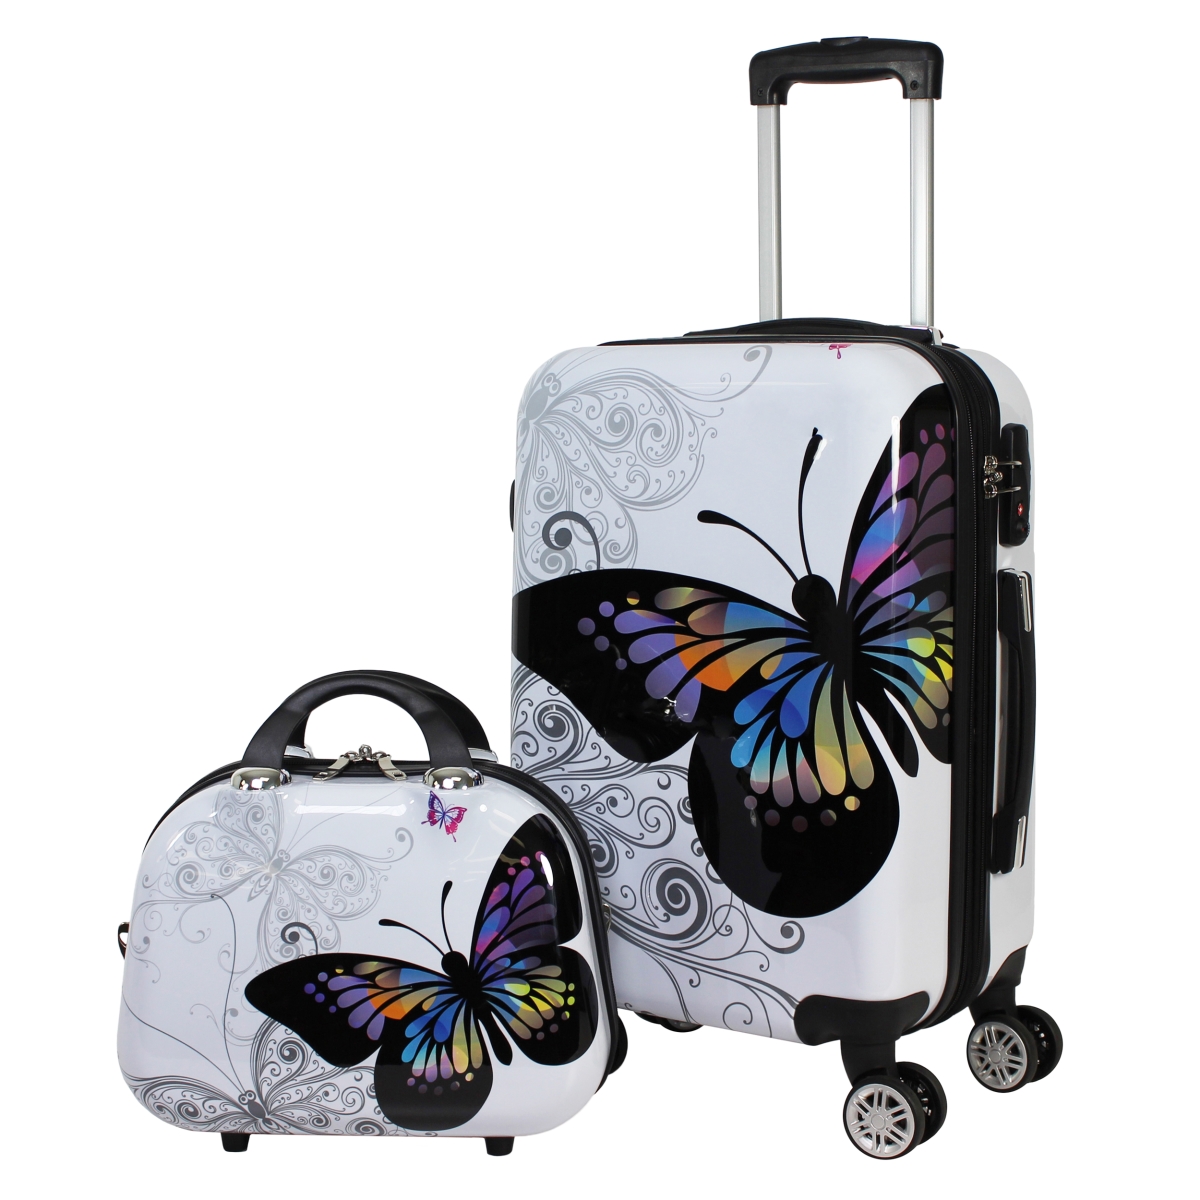 24dm110-2 Butterfly Hardside Carry On Spinner Luggage Set - 2 Piece